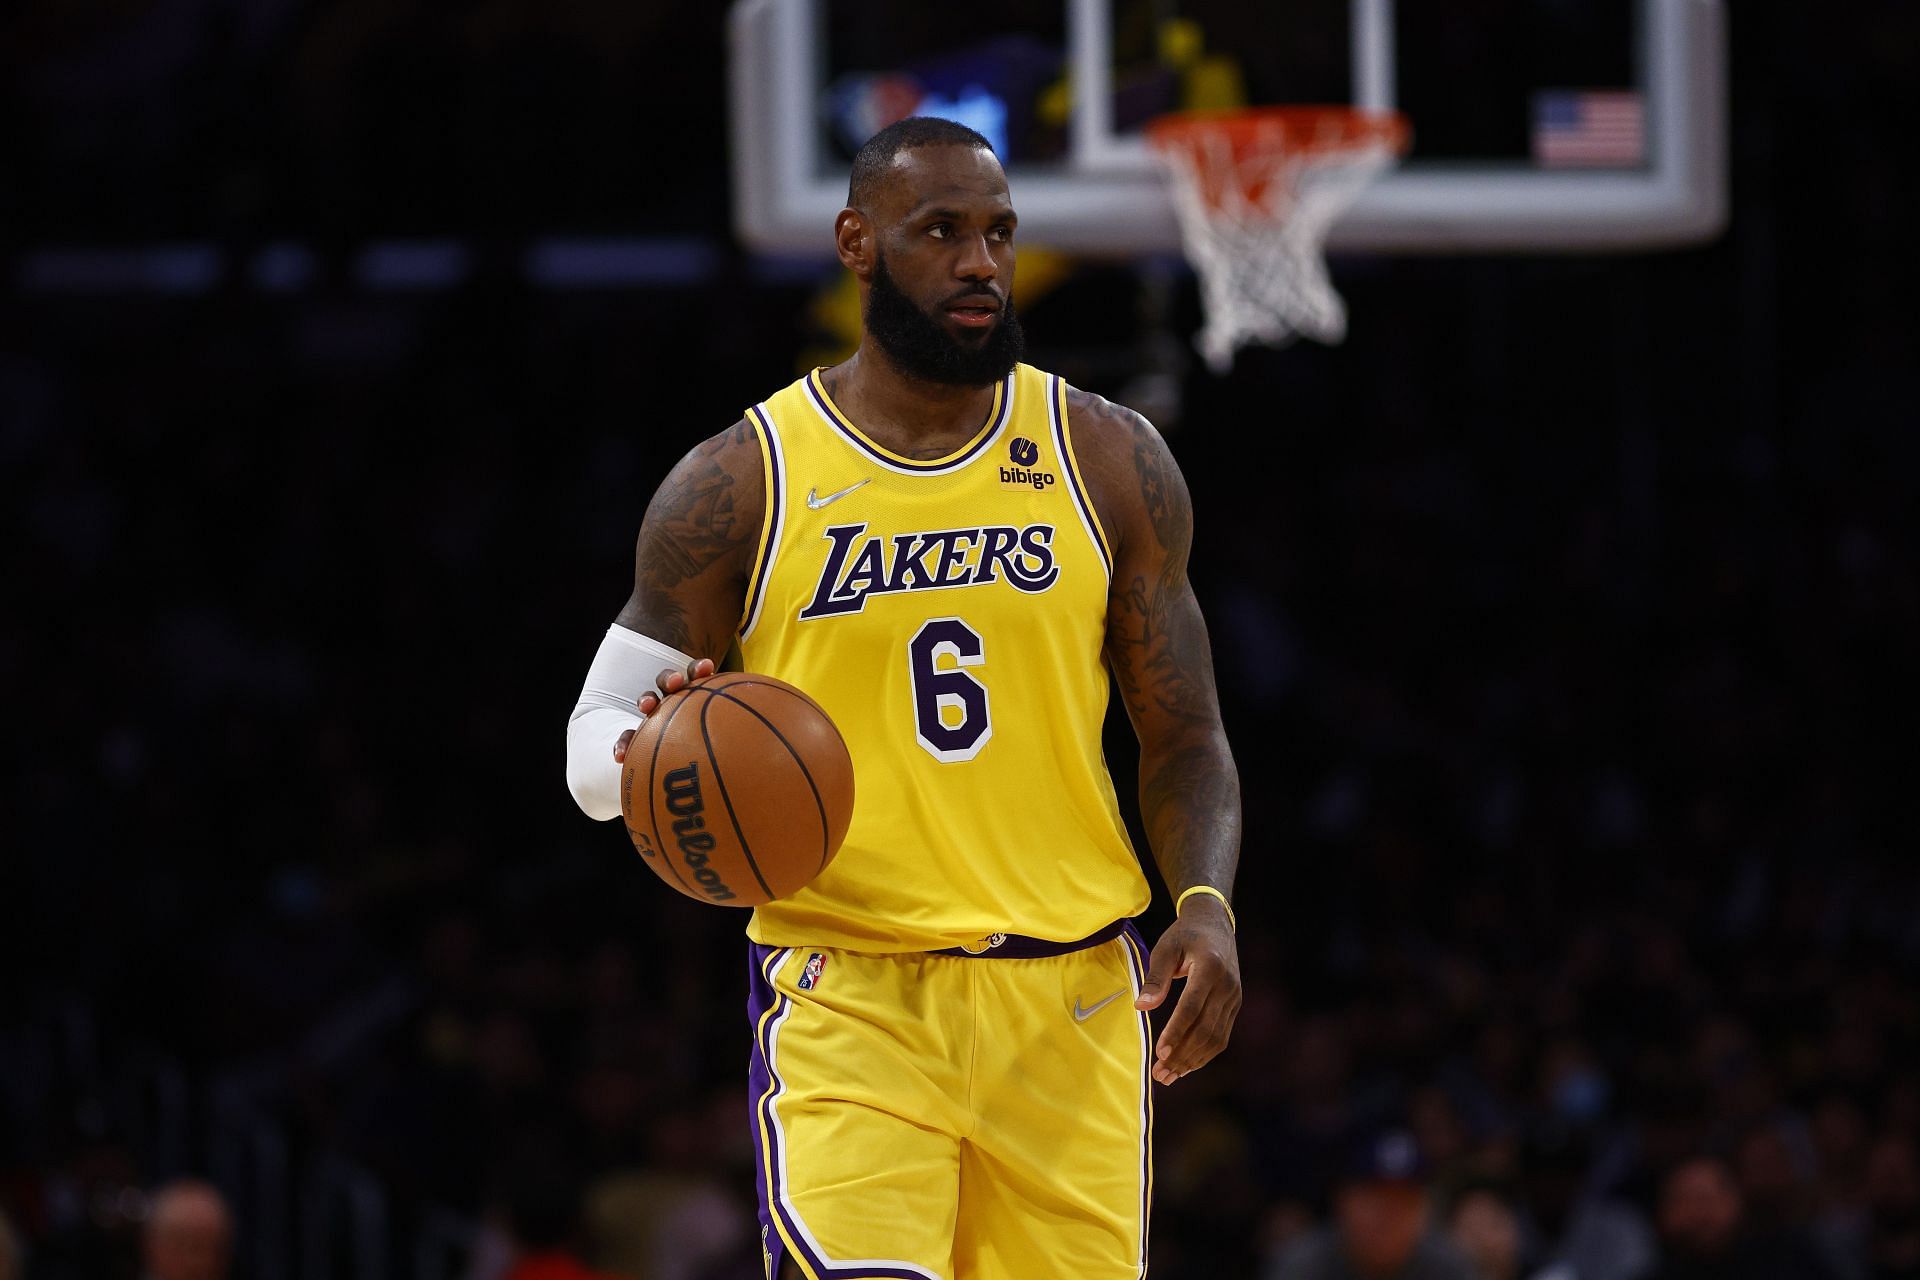 Los Angeles Lakers All-Star LeBron James